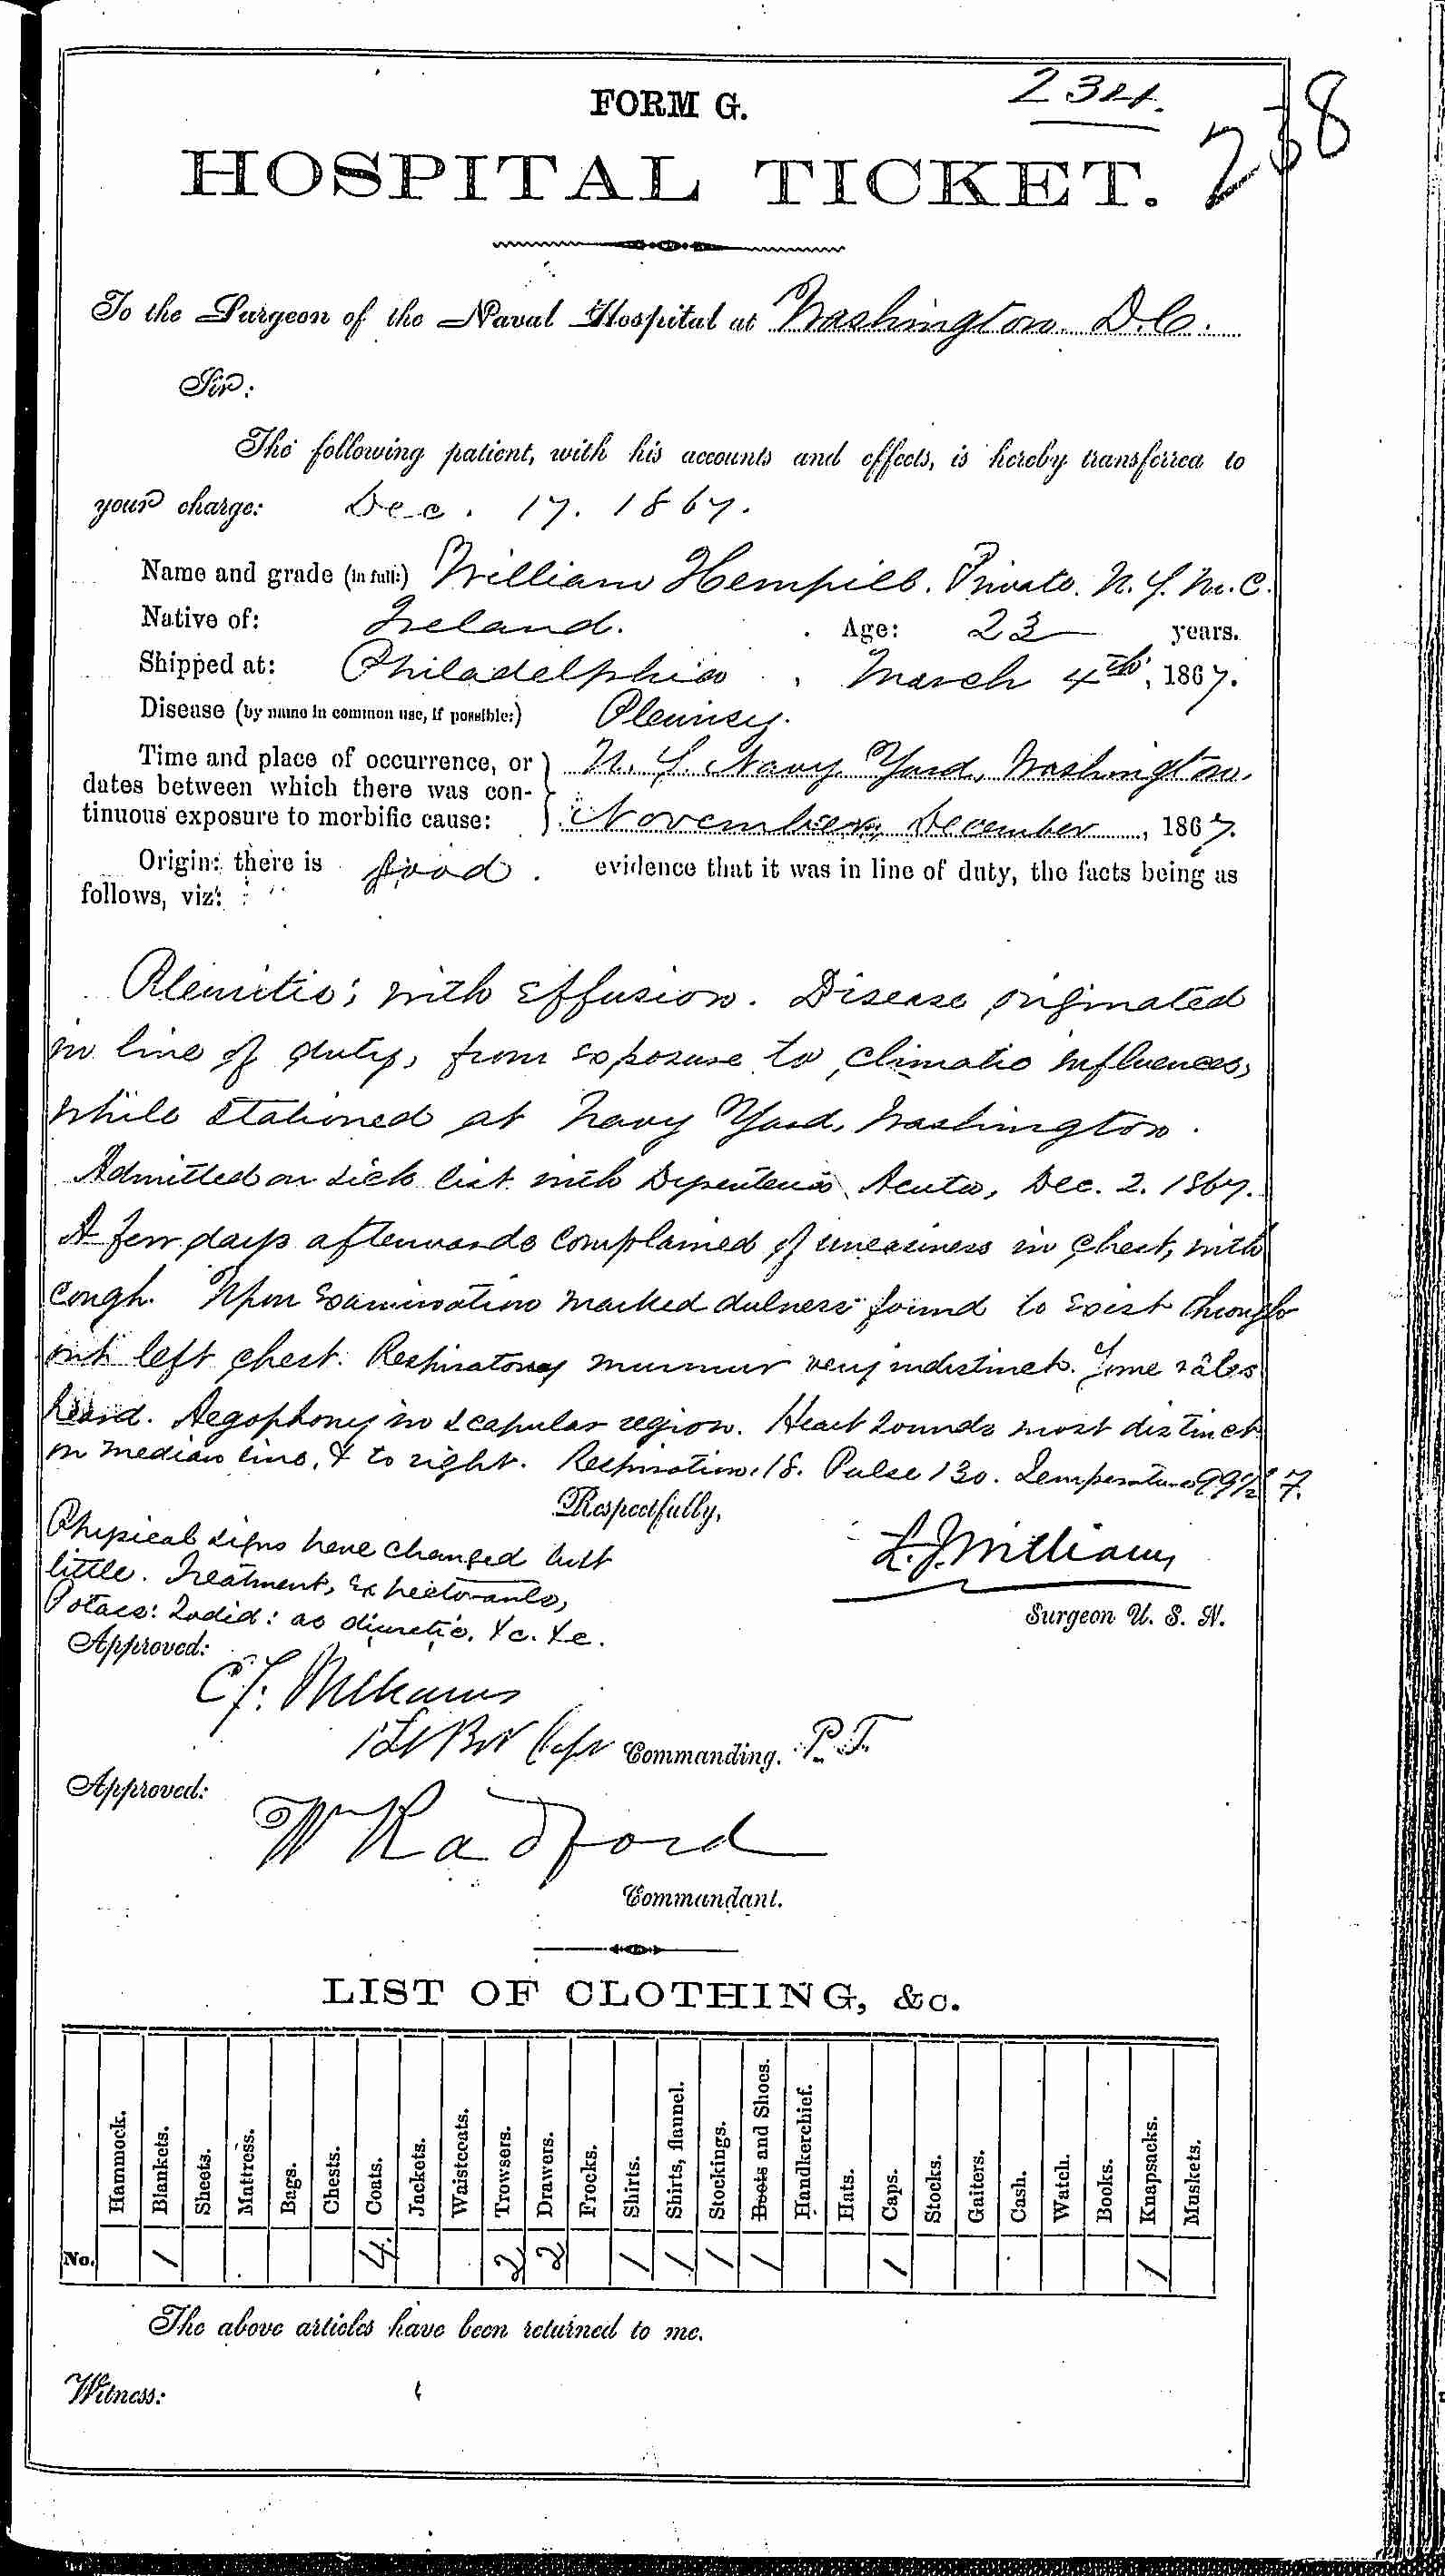 Entry for William Hempill (page 3 of 4) in the log Hospital Tickets and Case Papers - Naval Hospital - Washington, D.C. - 1866-68